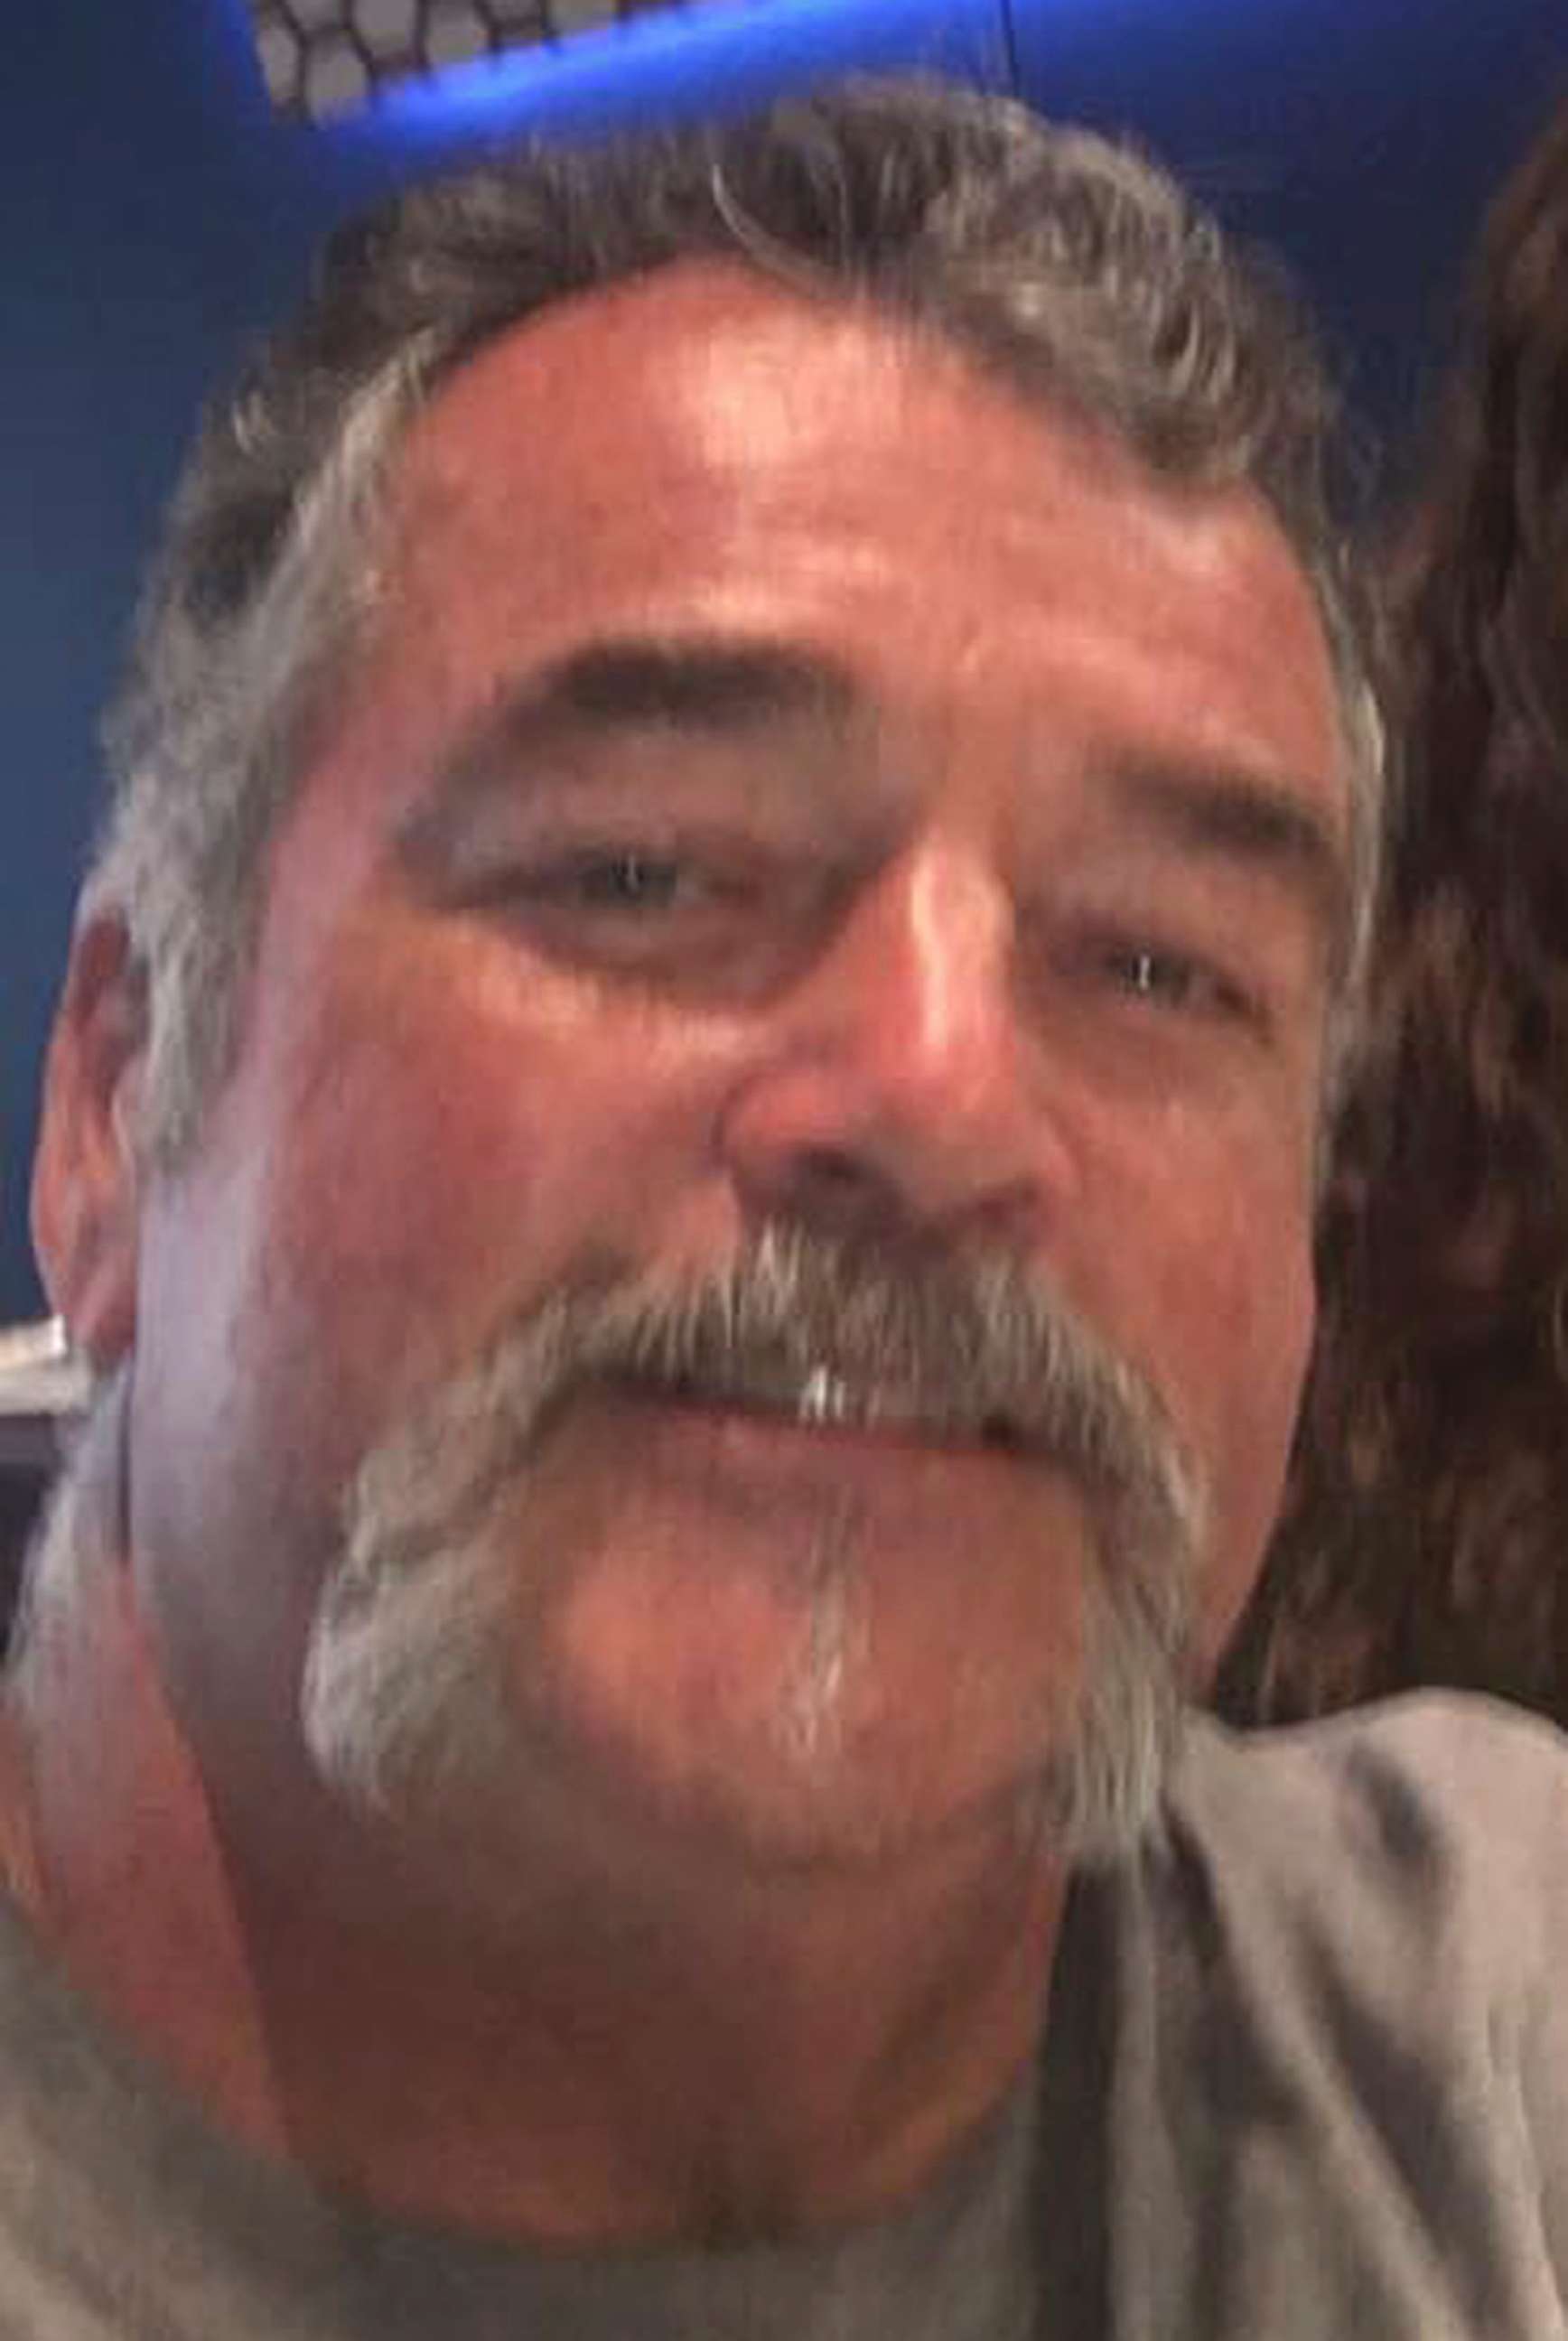 PHOTO: This undated photo shows John Phippen, one of the people killed in Las Vegas after a gunman opened fire, Oct. 1, 2017, at a country music festival. 